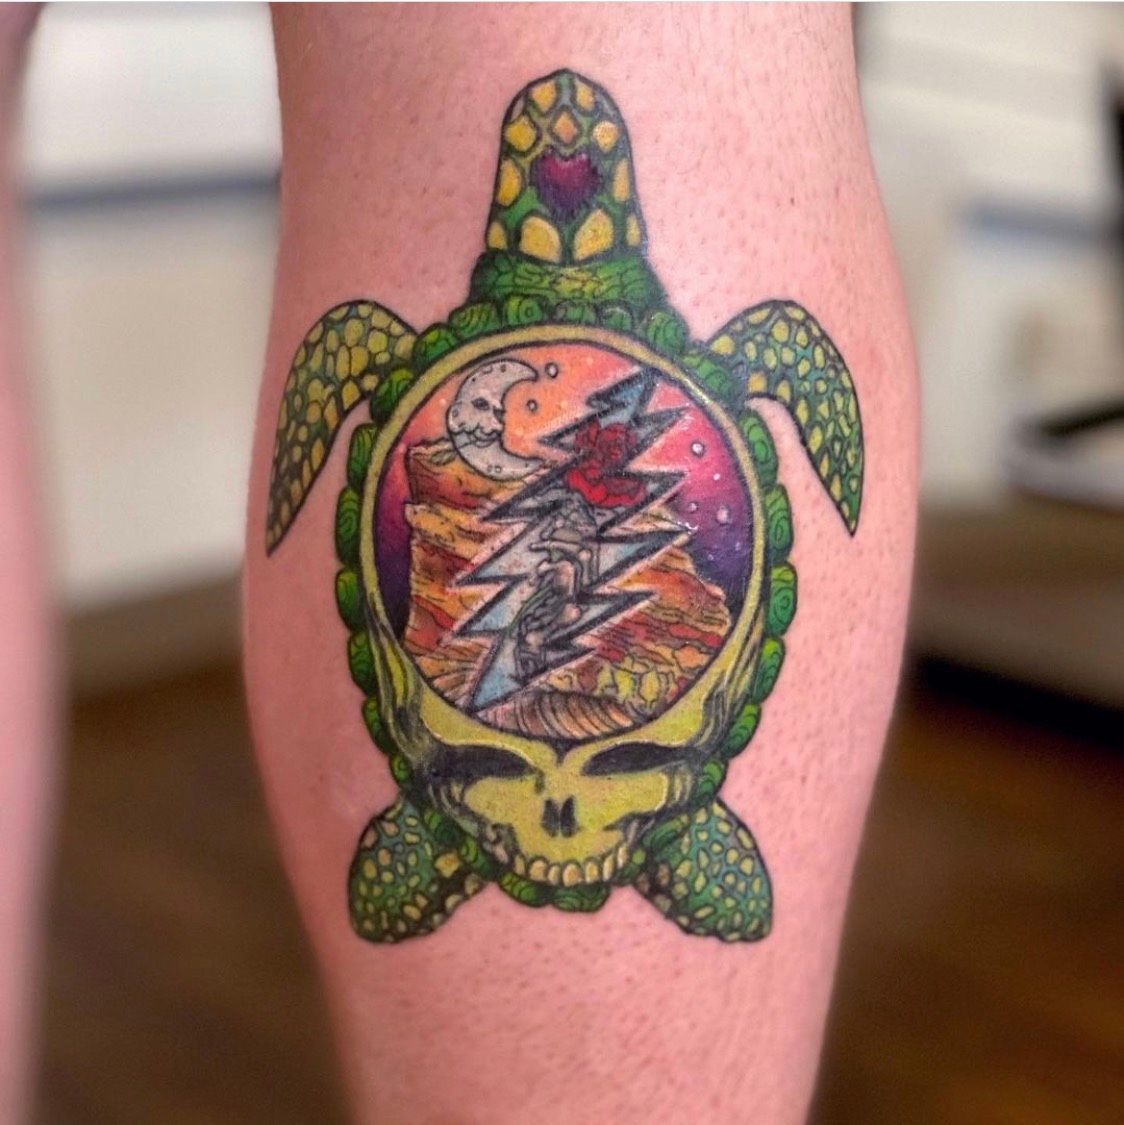 Grateful Dead Terrapin Station tattoo with my wife Top Ink in  Thomasville Ga artist is Chris  rtattoos